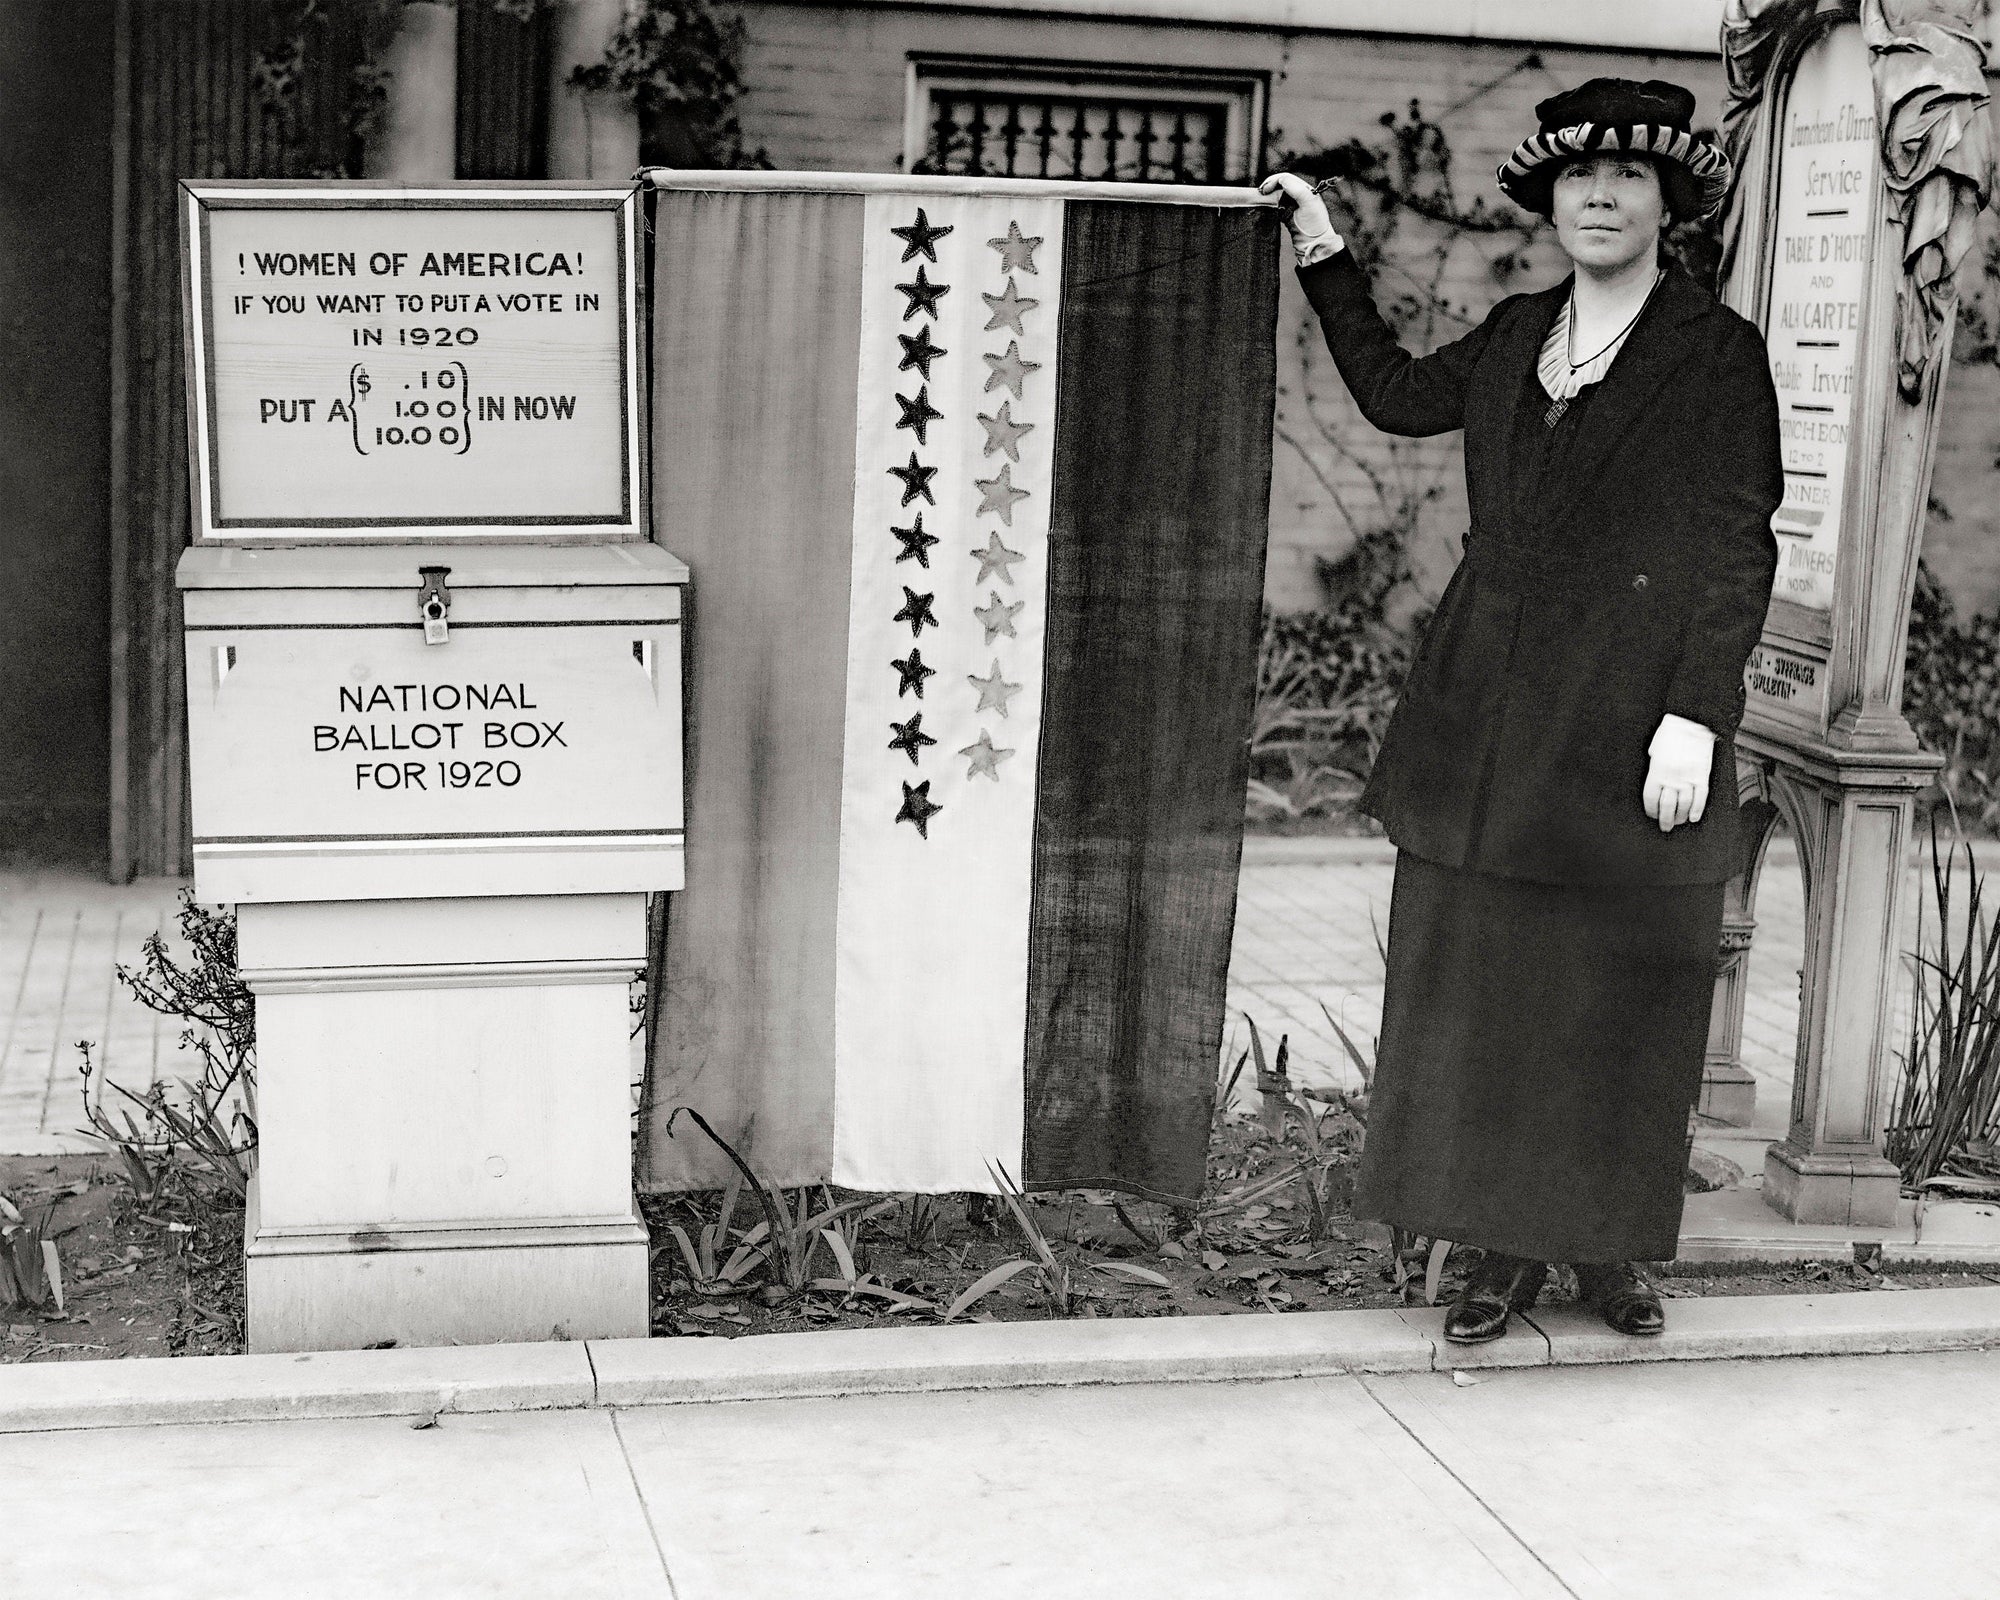 A Woman Suffragette Holding the Suffragette Flag For Equal rights in 1920 Historical Pix